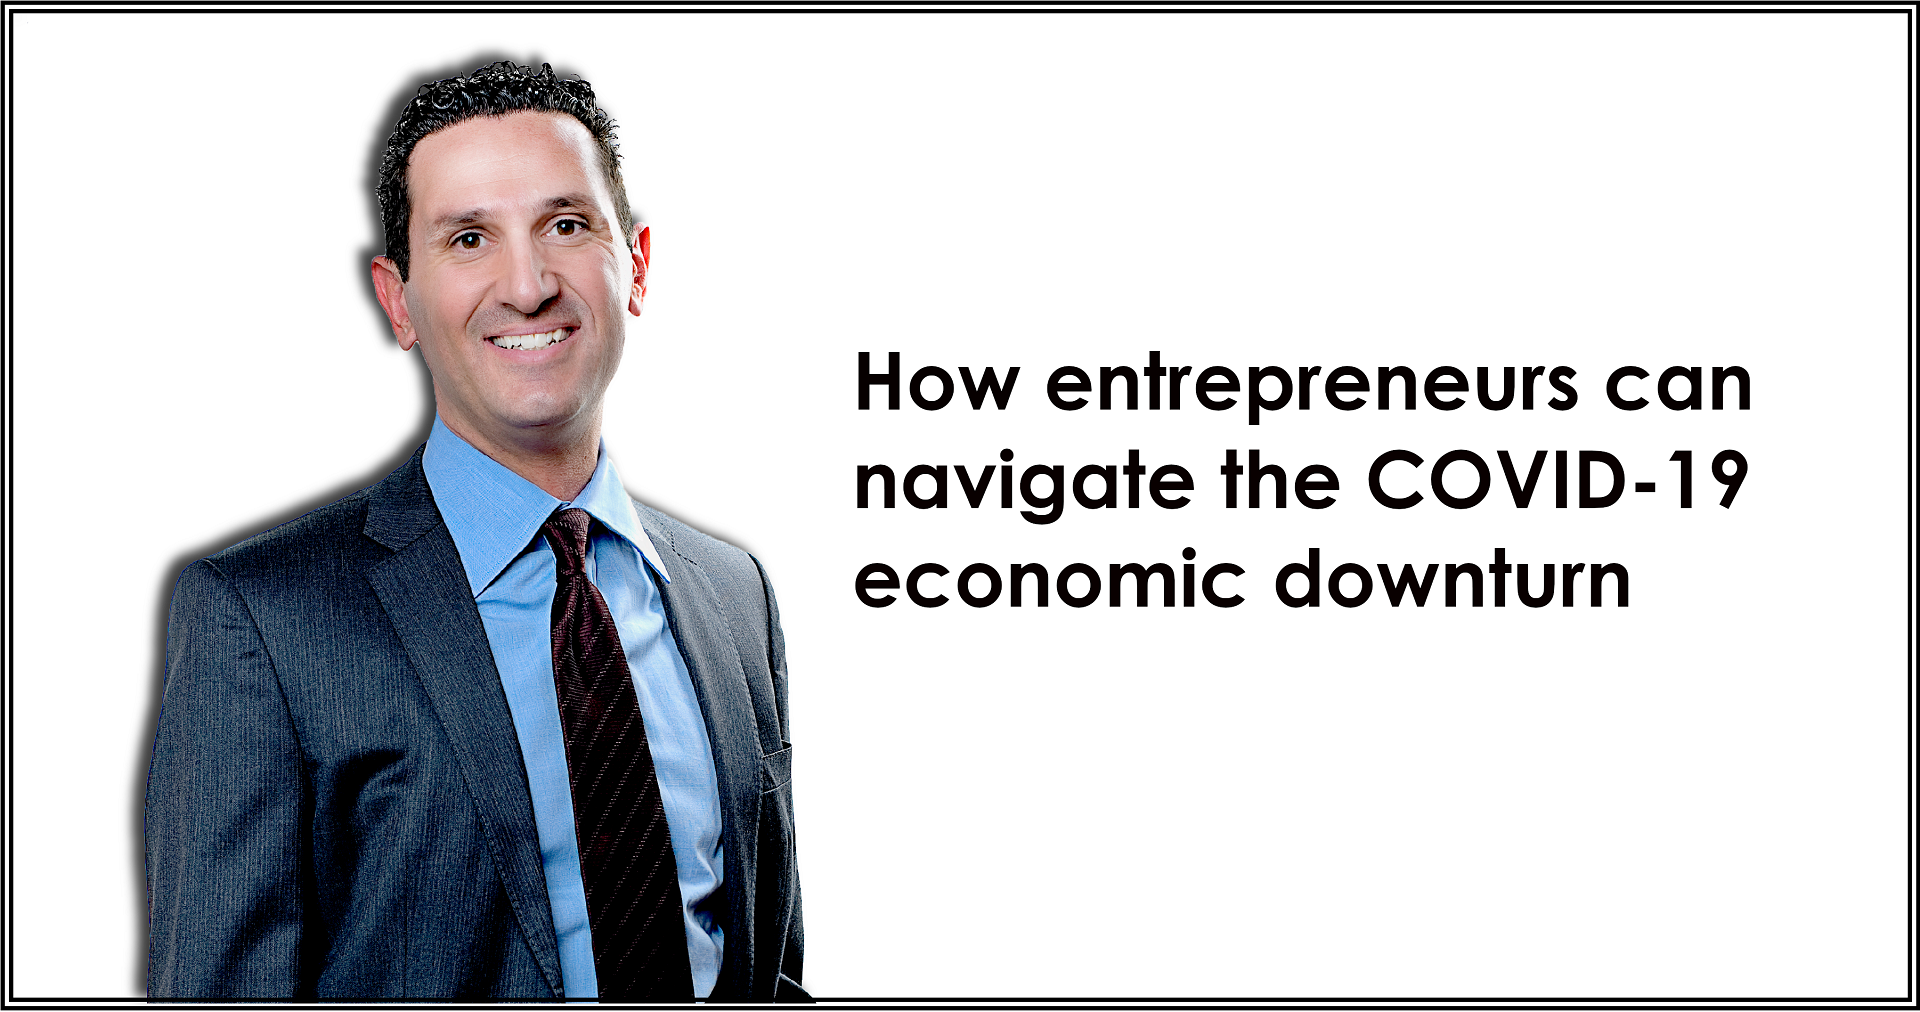 BOOTSTRAP WITH FRANK CIANCIULLI: How entrepreneurs can navigate the COVID-19 economic downturn